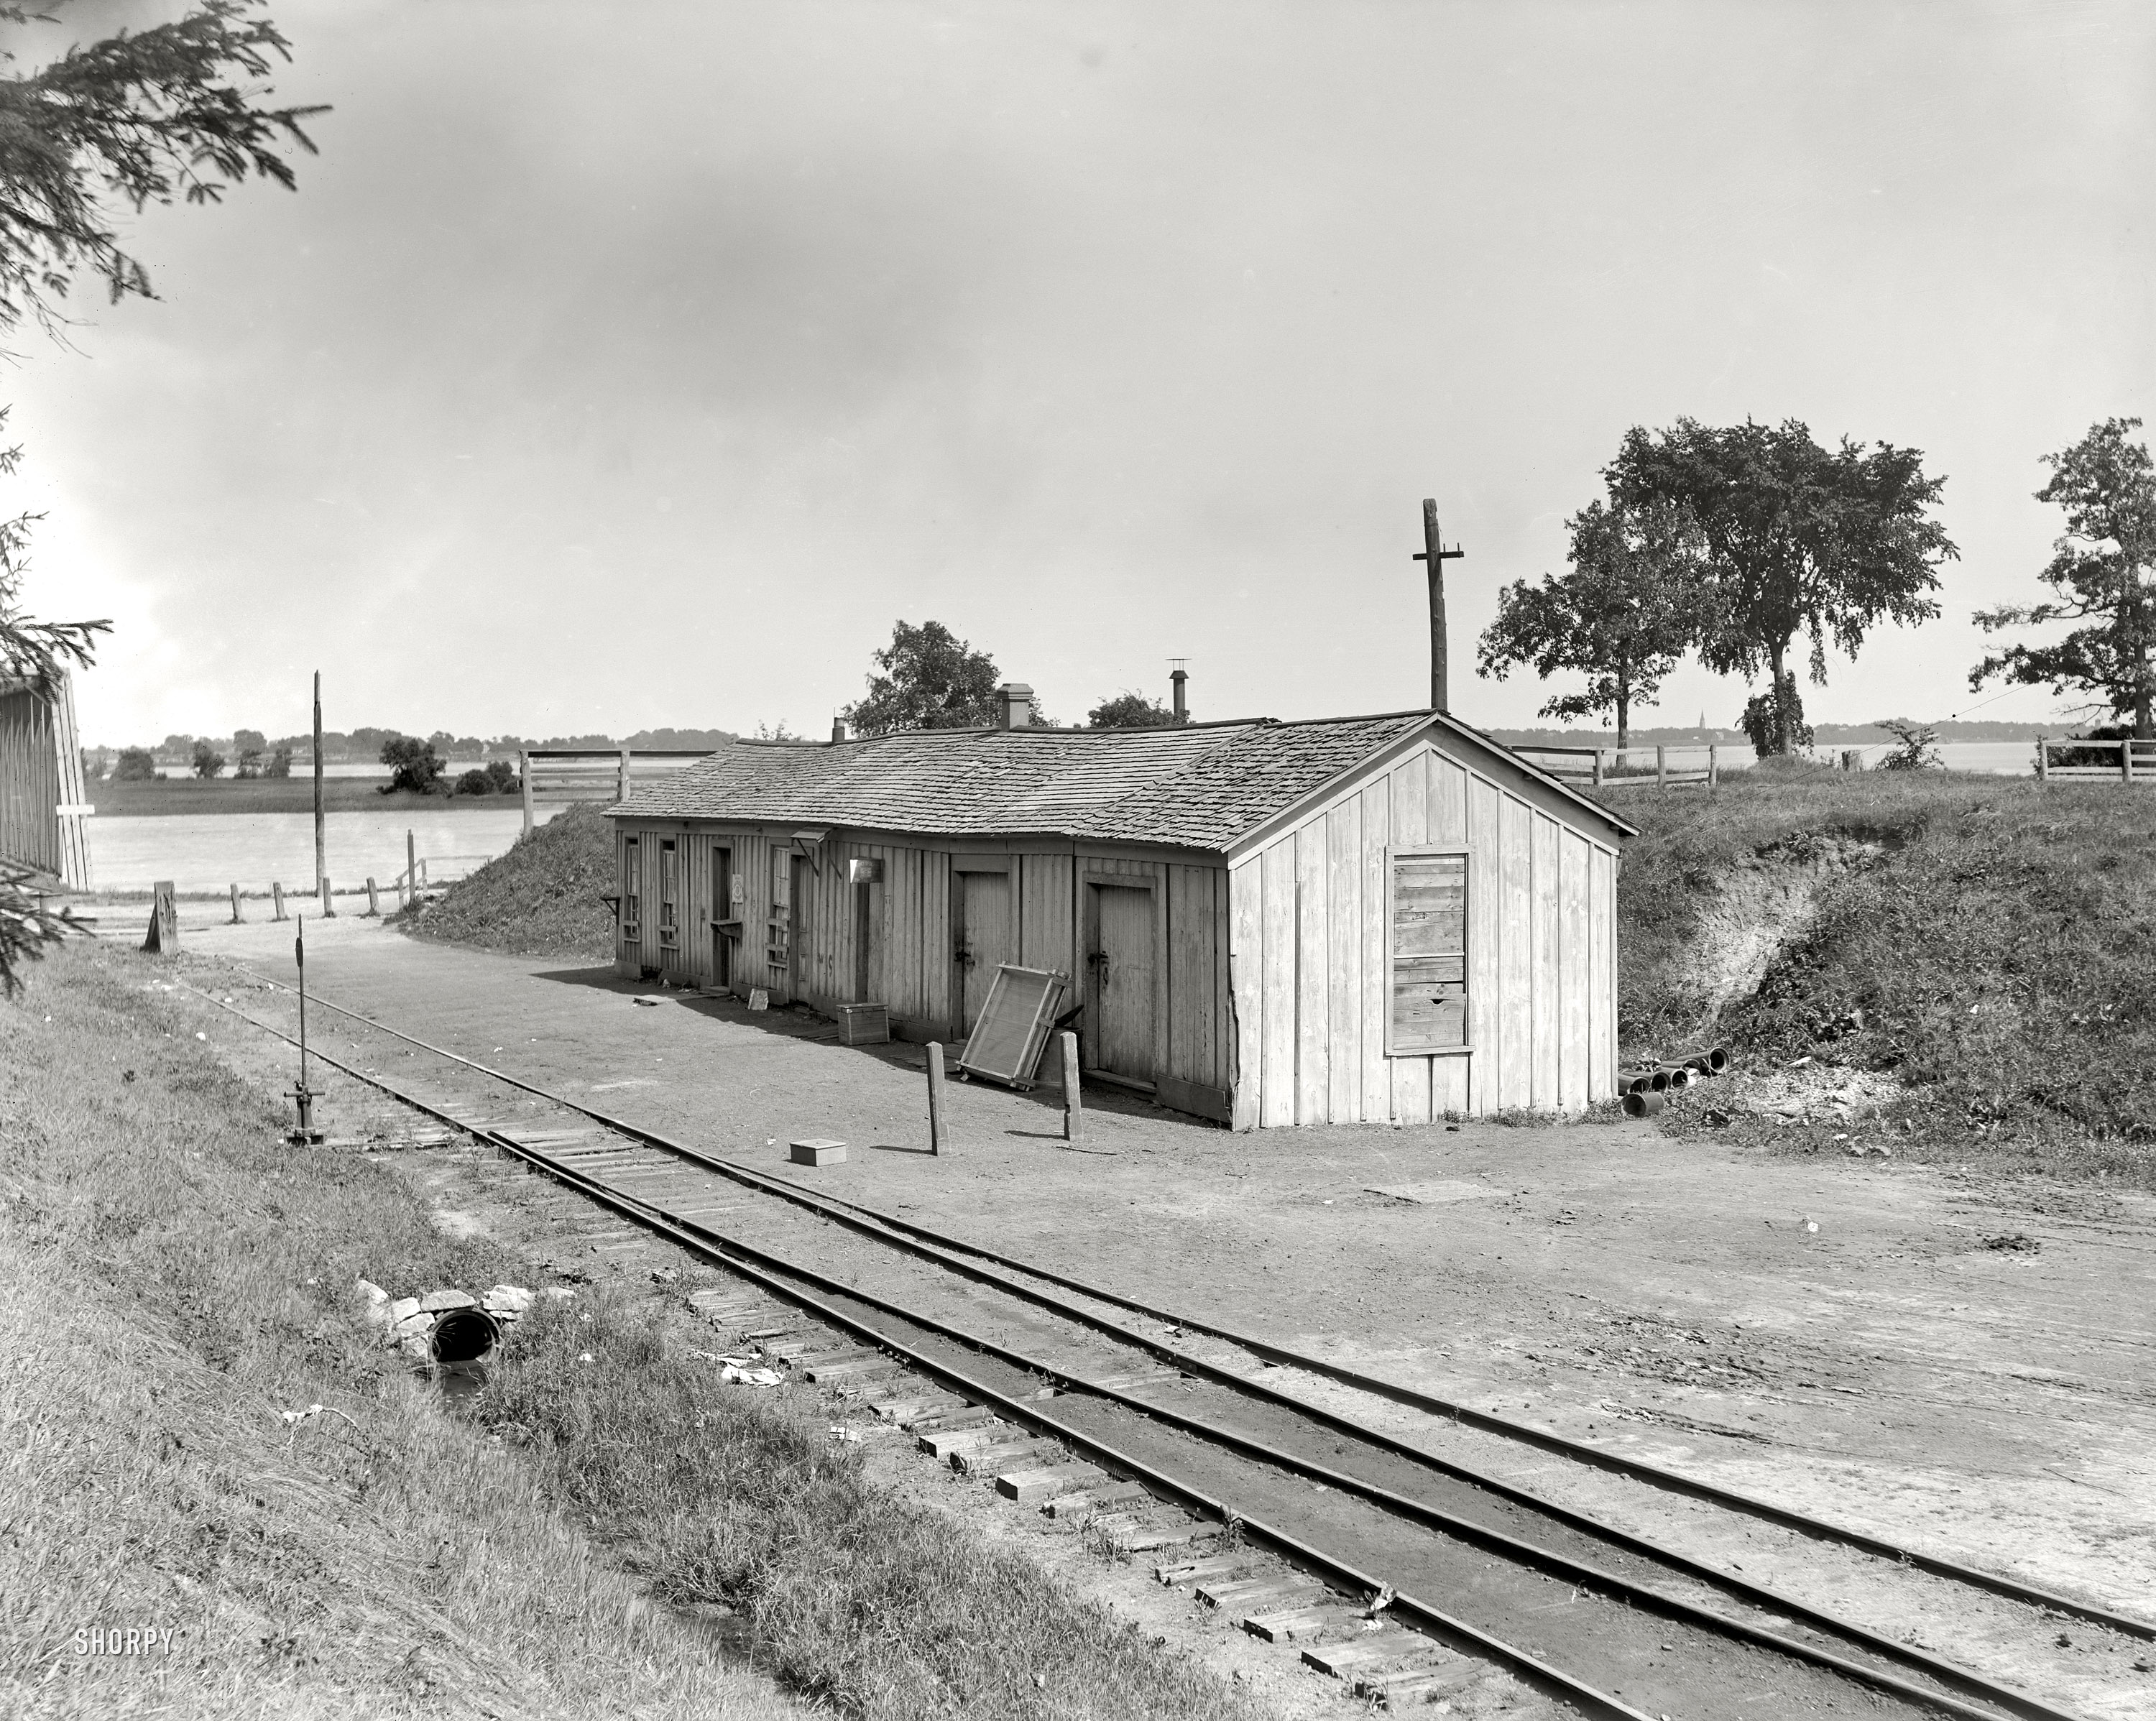 Circa 1900. "Railway depot at Grosse Ile, Michigan." Sunnyside Station, as one commenter has informed us. This concludes our visit to Grosse Ile on the Detroit River. 8x10 inch dry plate glass negative, Detroit Publishing Co. View full size.